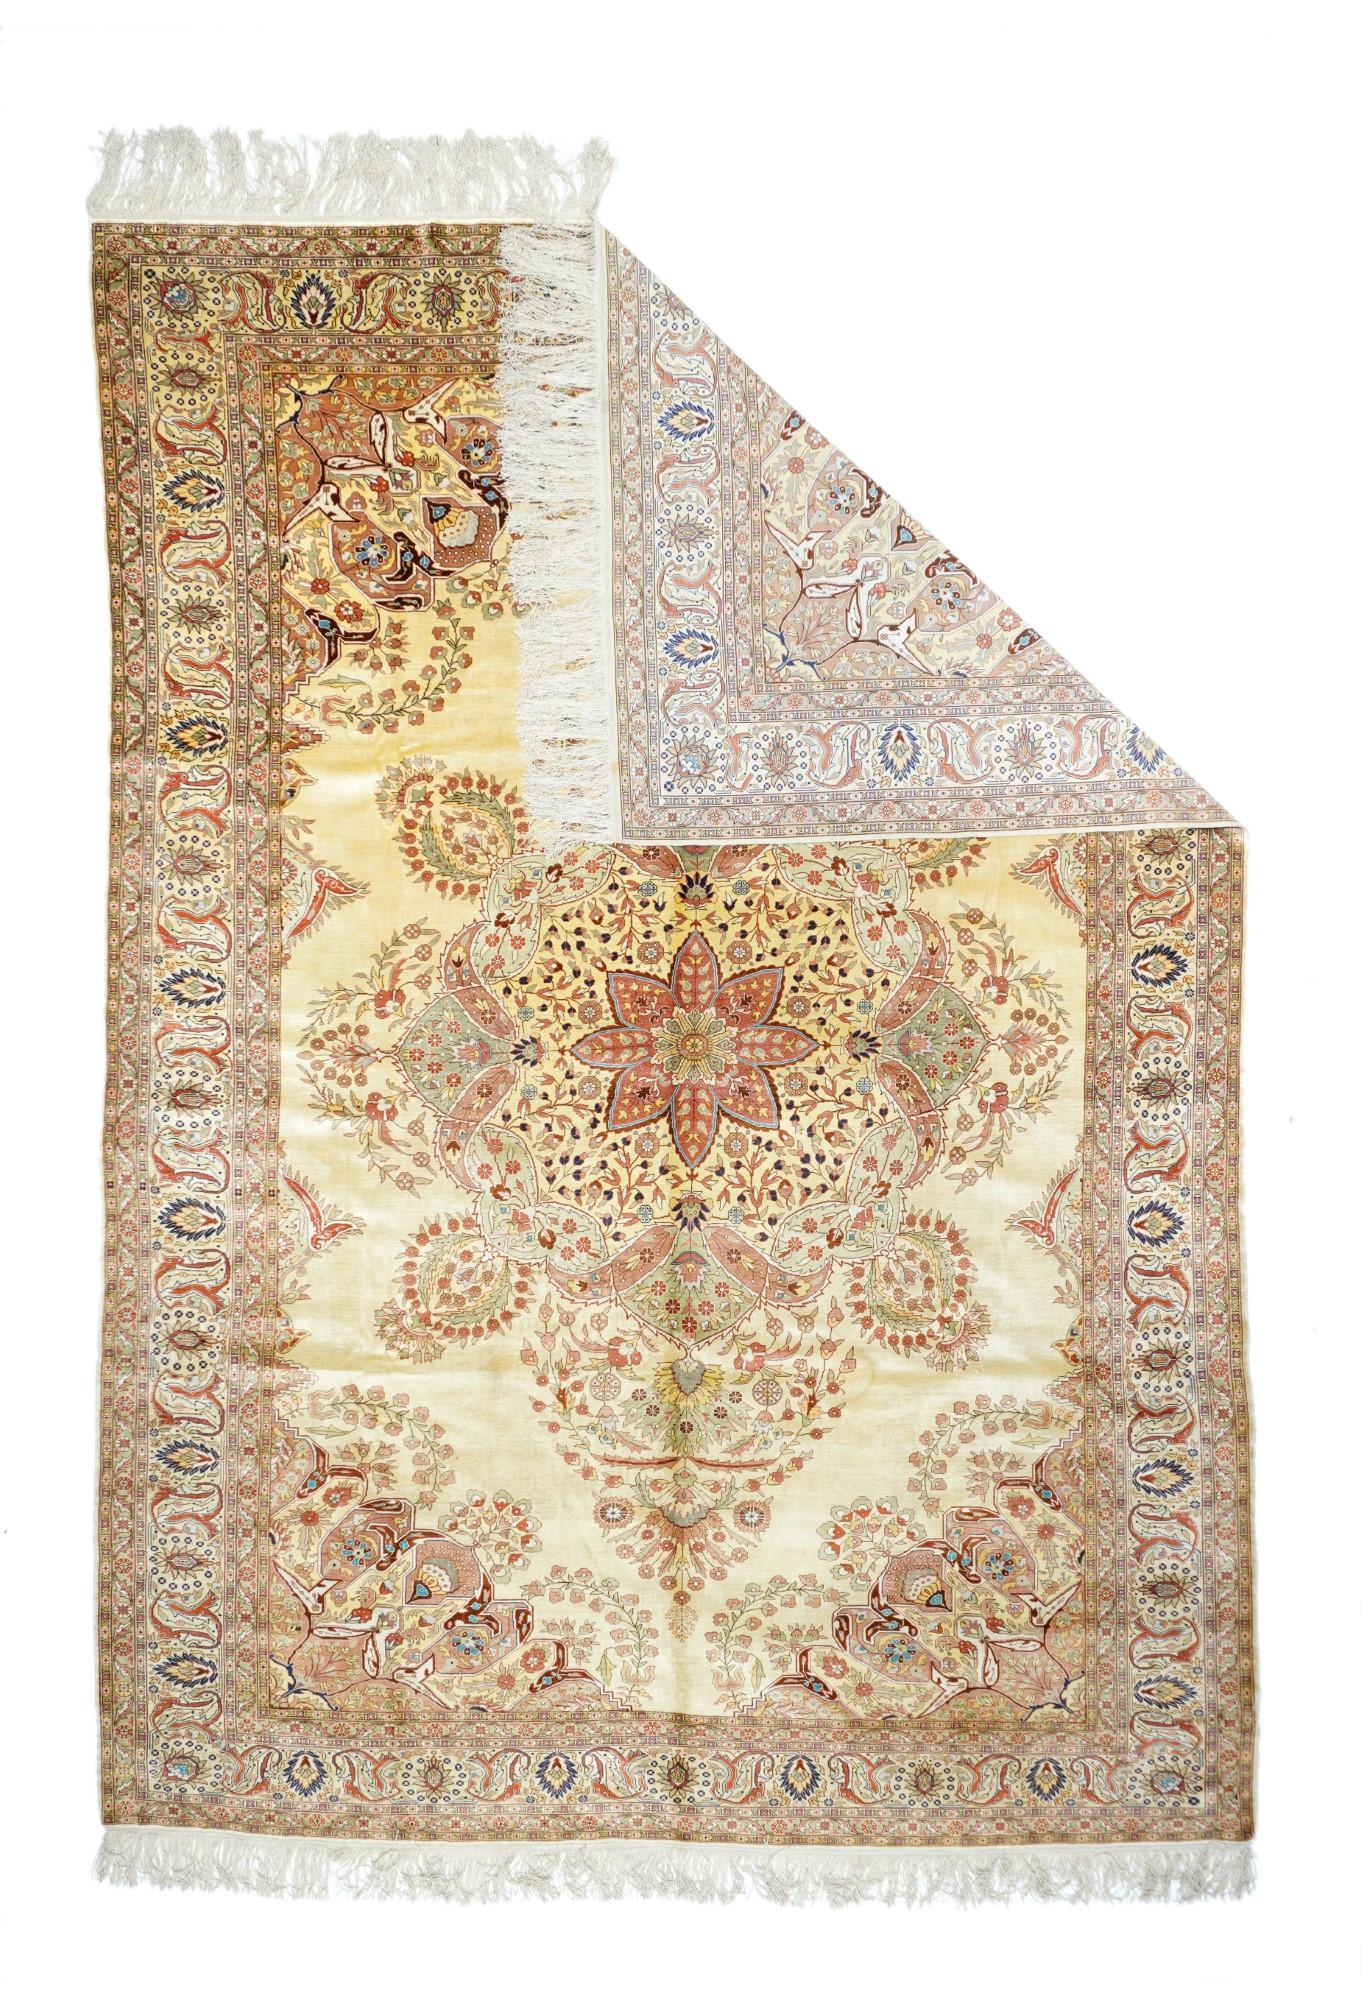 Extremely Fine Turkish Silk Herekeh Rug 6'5'' x 9'6''. A lightly-toned, finely woven Turkish city small carpet in as strongly Kirman-influenced style. The sandy-straw semi-open field shows a complex medallion of flower sprays, boteh leaves, serrated